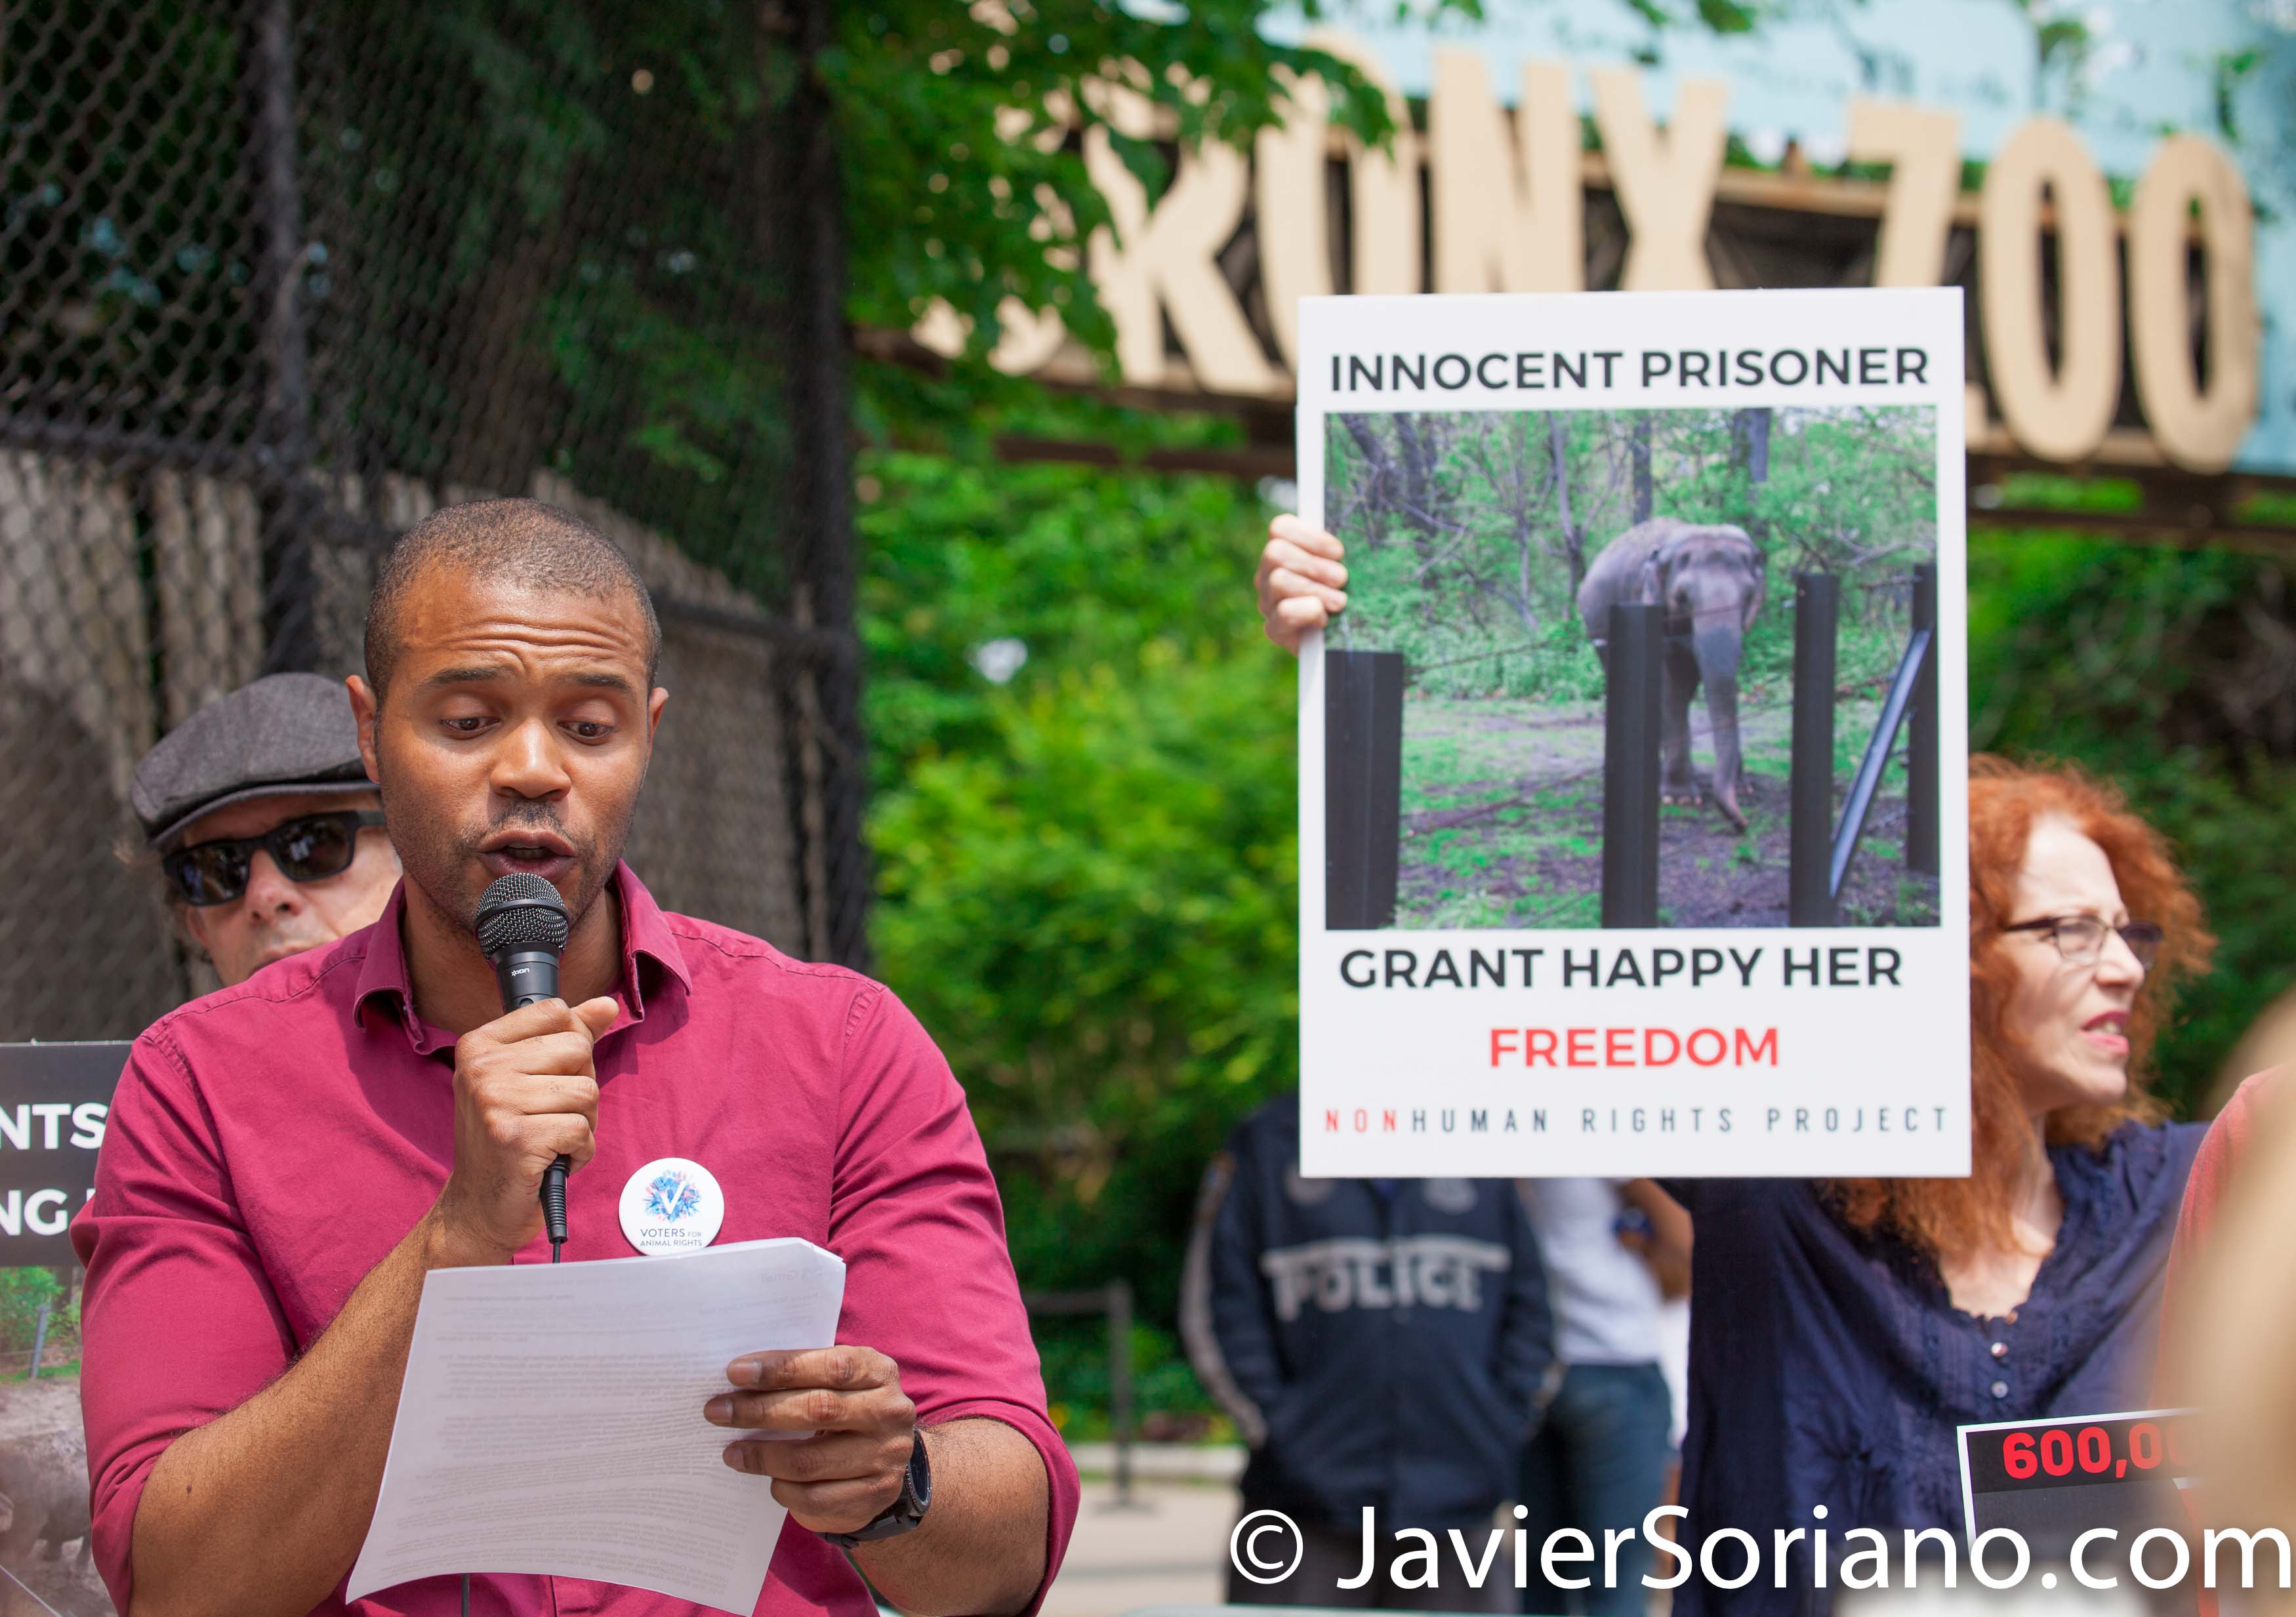 Bronx, New York City. Saturday, June 1, 2019 – Rally in support of Happy’s freedom. Happy is a wild-born elephant held alone in captivity at the Bronx Zoo. The rally was organized by the Nonhuman Rights Project and it was joined by Change.org, CompassionWorks International, Voters For Animal Rights, In Defense of Animals, and Animal Cruelty Exposure Fund. During the rally, NhRP attorney gave updates on their litigation on behalf of Happy and other efforts to obtain rights for autonomous nonhuman animals. Activists called for recognition of Happy’s fundamental rights and her transfer to sanctuary. Credit: Photo by Javier Soriano/www.JavierSoriano.com